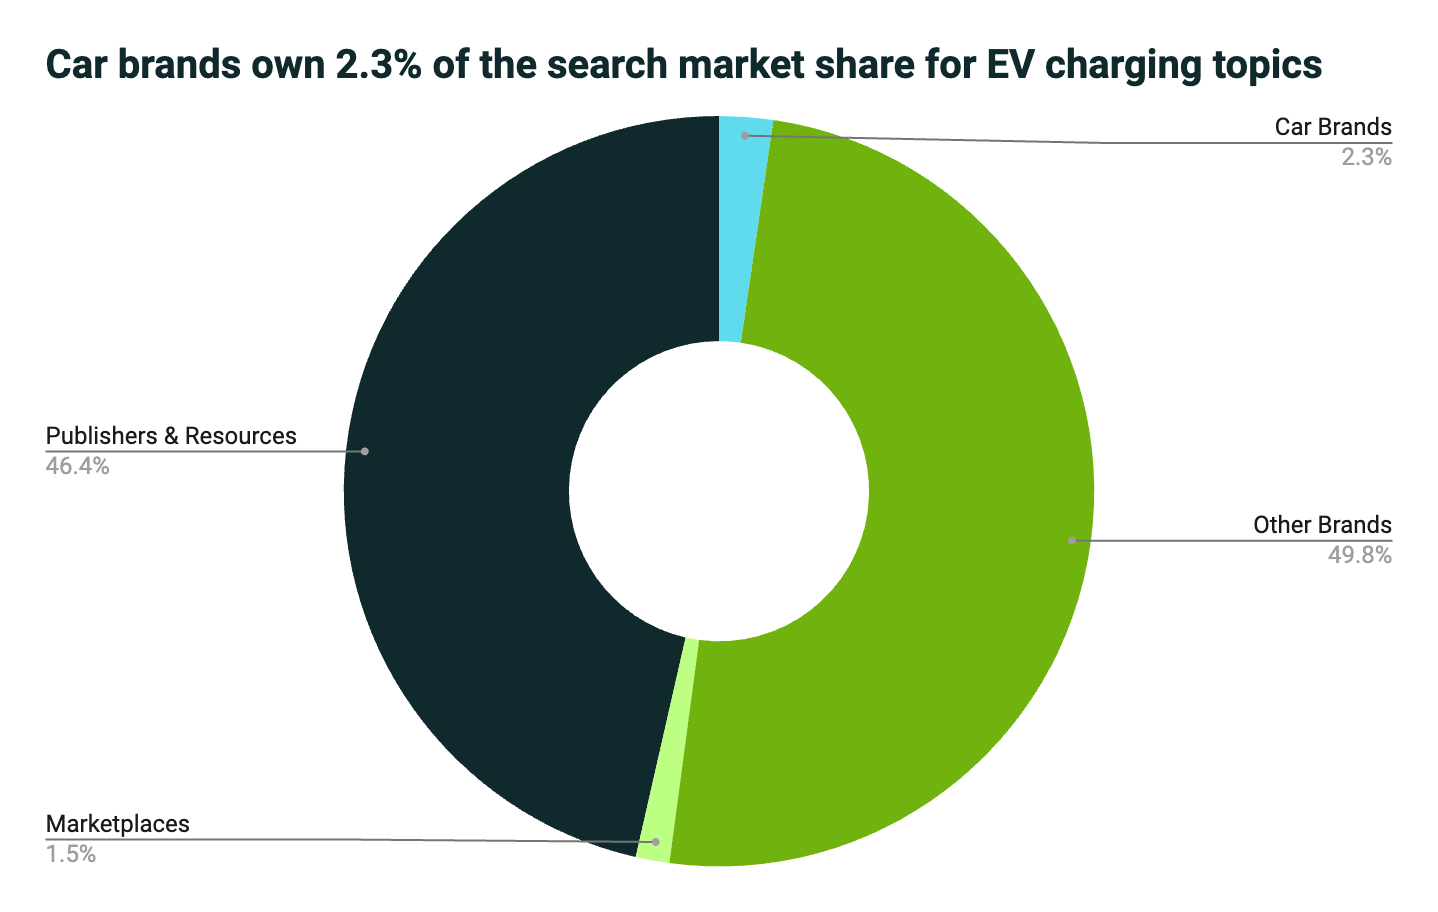 graph showing car brands own 2.3% of the search market share for EV charging topics